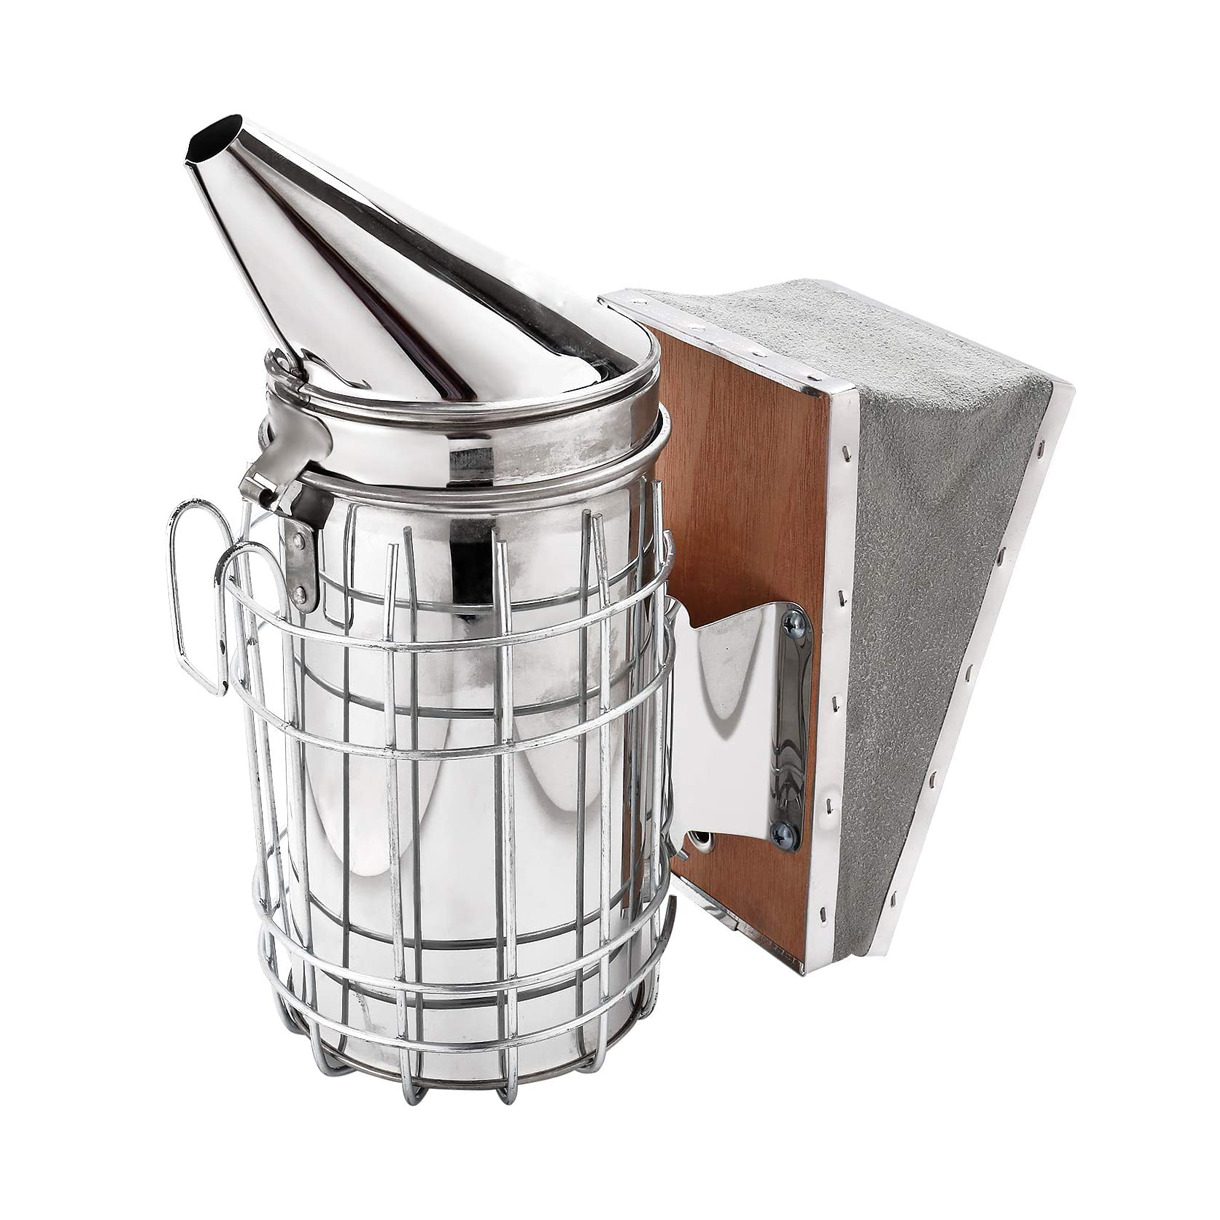 The Original Smoker that plumes with a direct angle to reach even the most difficult areas of the hive